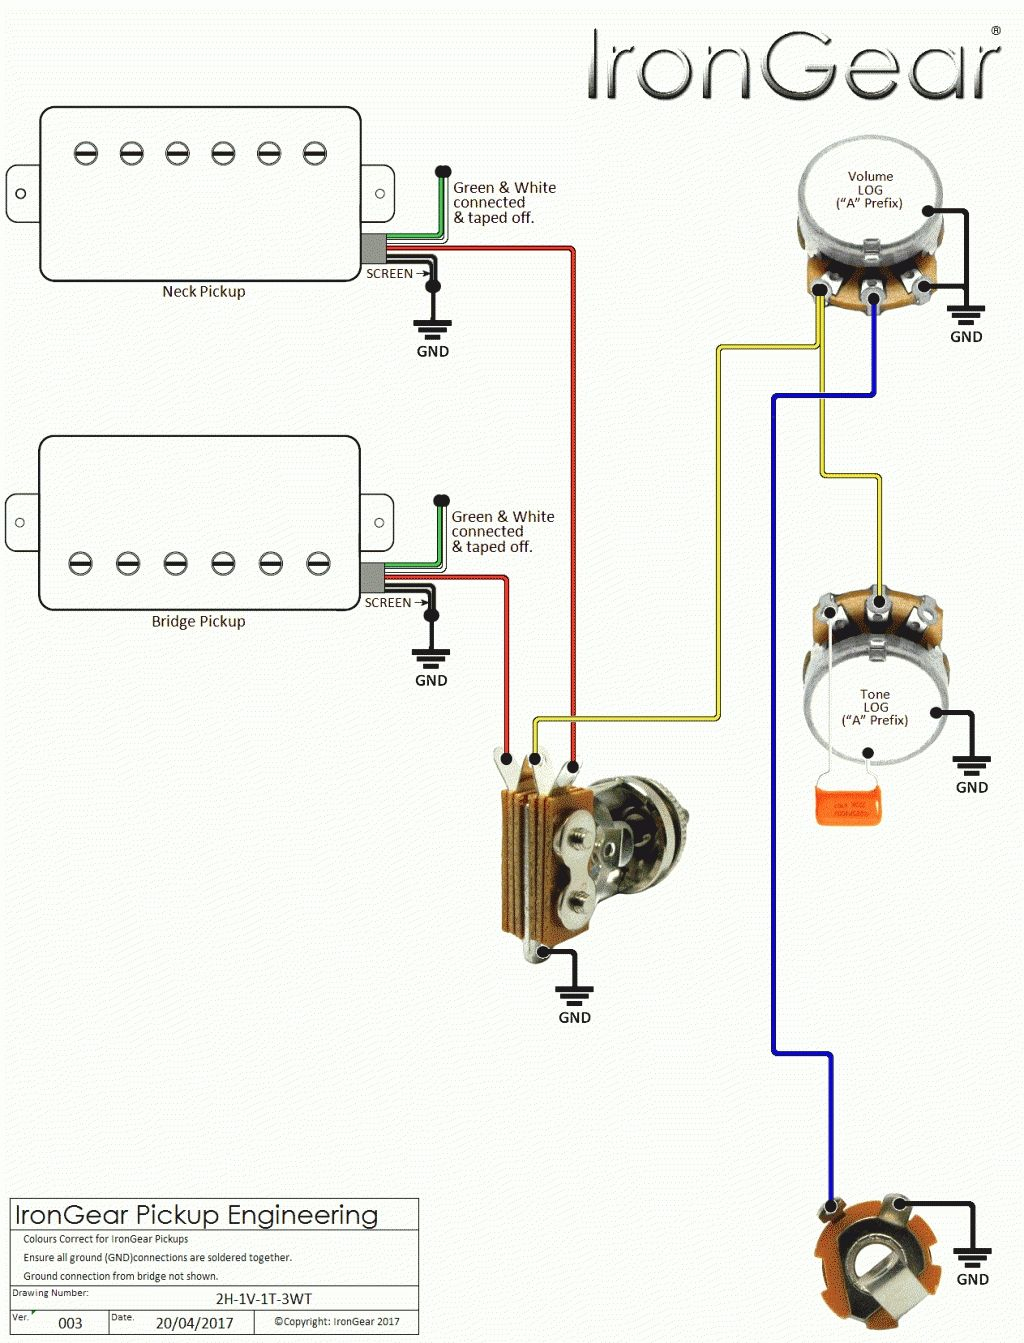 Wiring-Diagram-For-Electric-Bass-Guitar &amp;amp; P Bass Wiring Diagram - P Bass Wiring Diagram